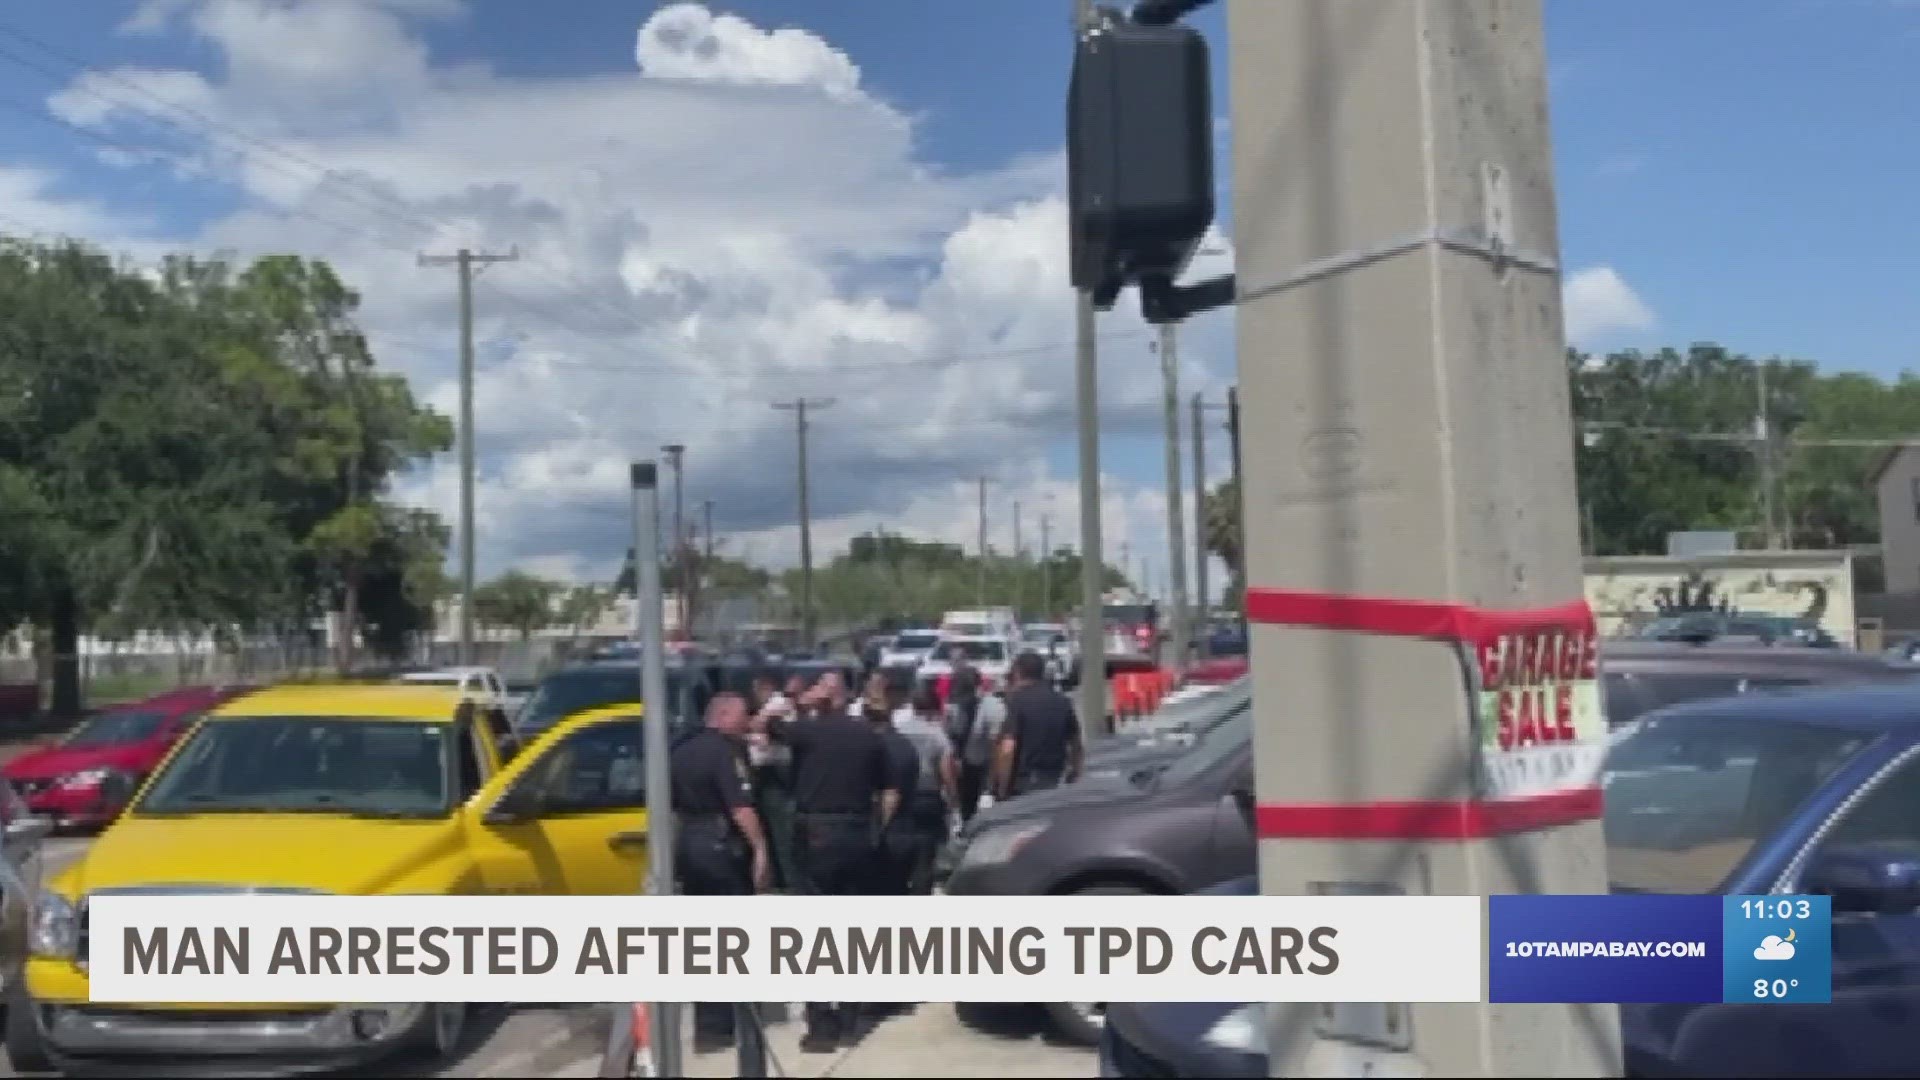 The driver, a 54-year-old man, is accused of leading authorities on a chase before ramming his Dodge Ram pickup truck into Tampa police cars.